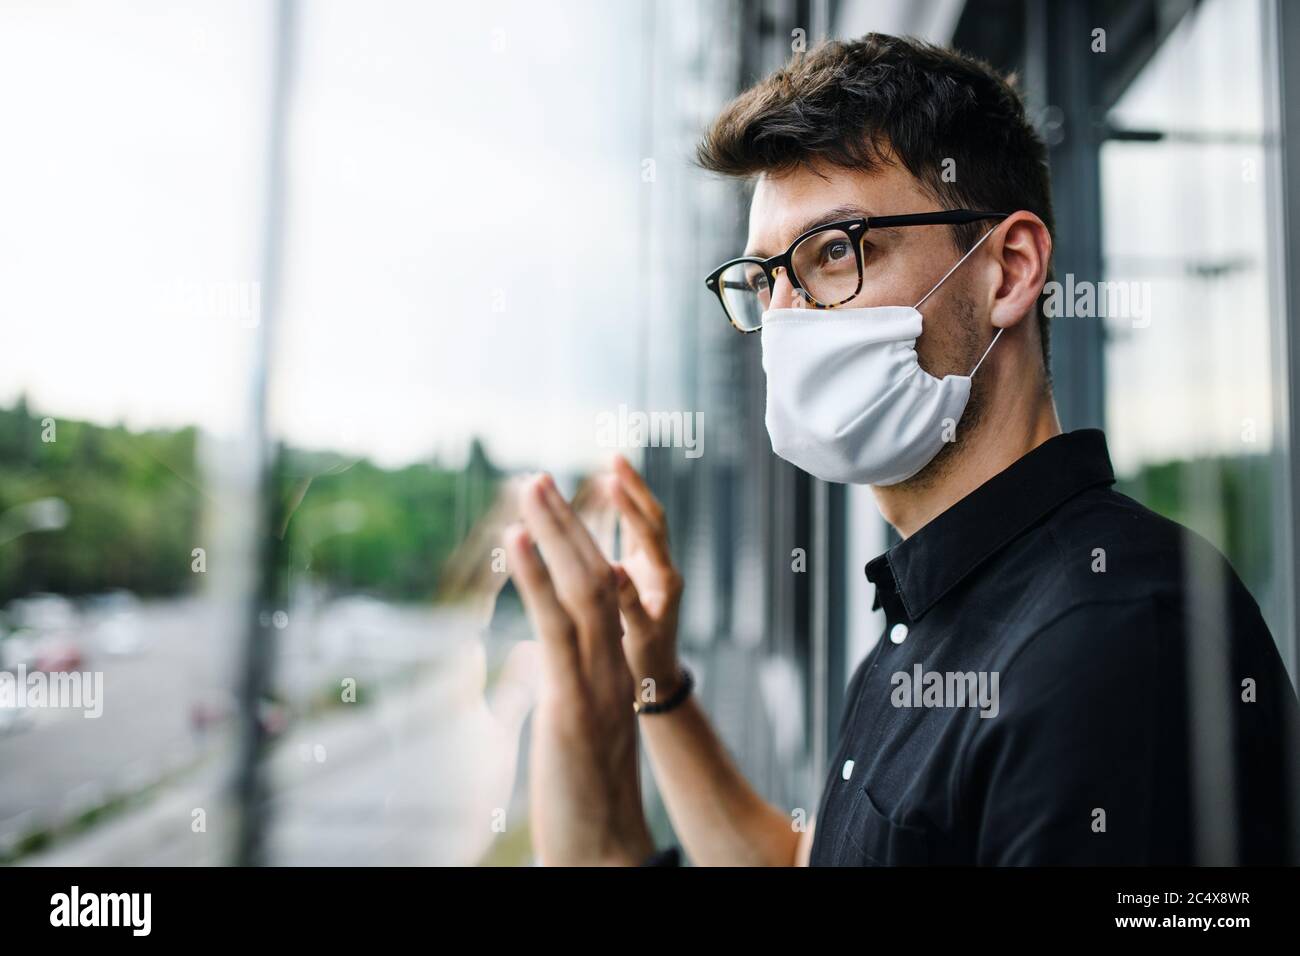 Sad man with face mask looking out through window, quarantine and lockdown concept. Stock Photo